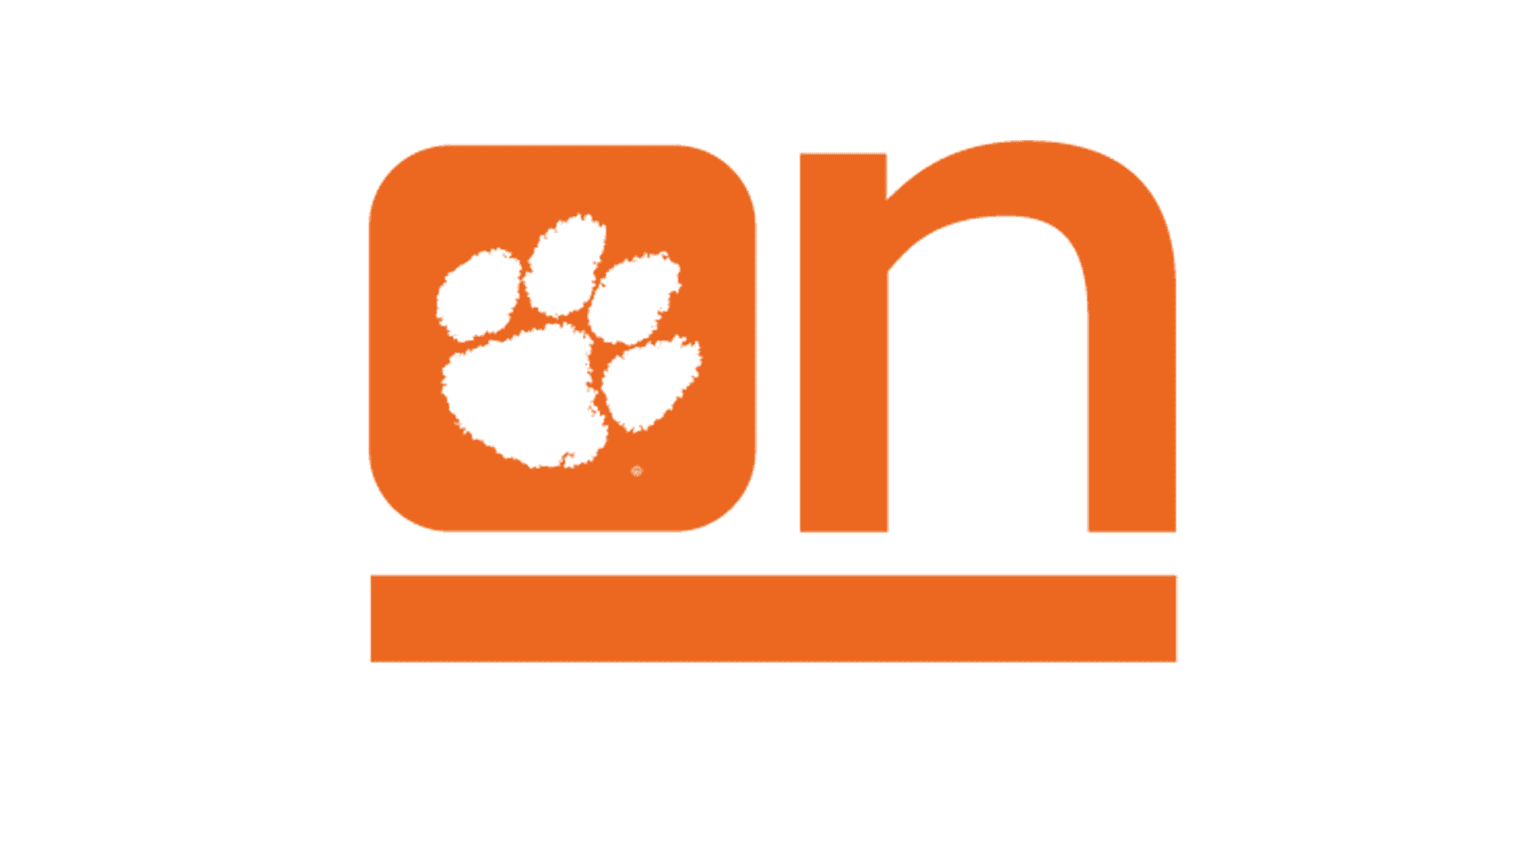 Quality Matters certified course available from Clemson Online